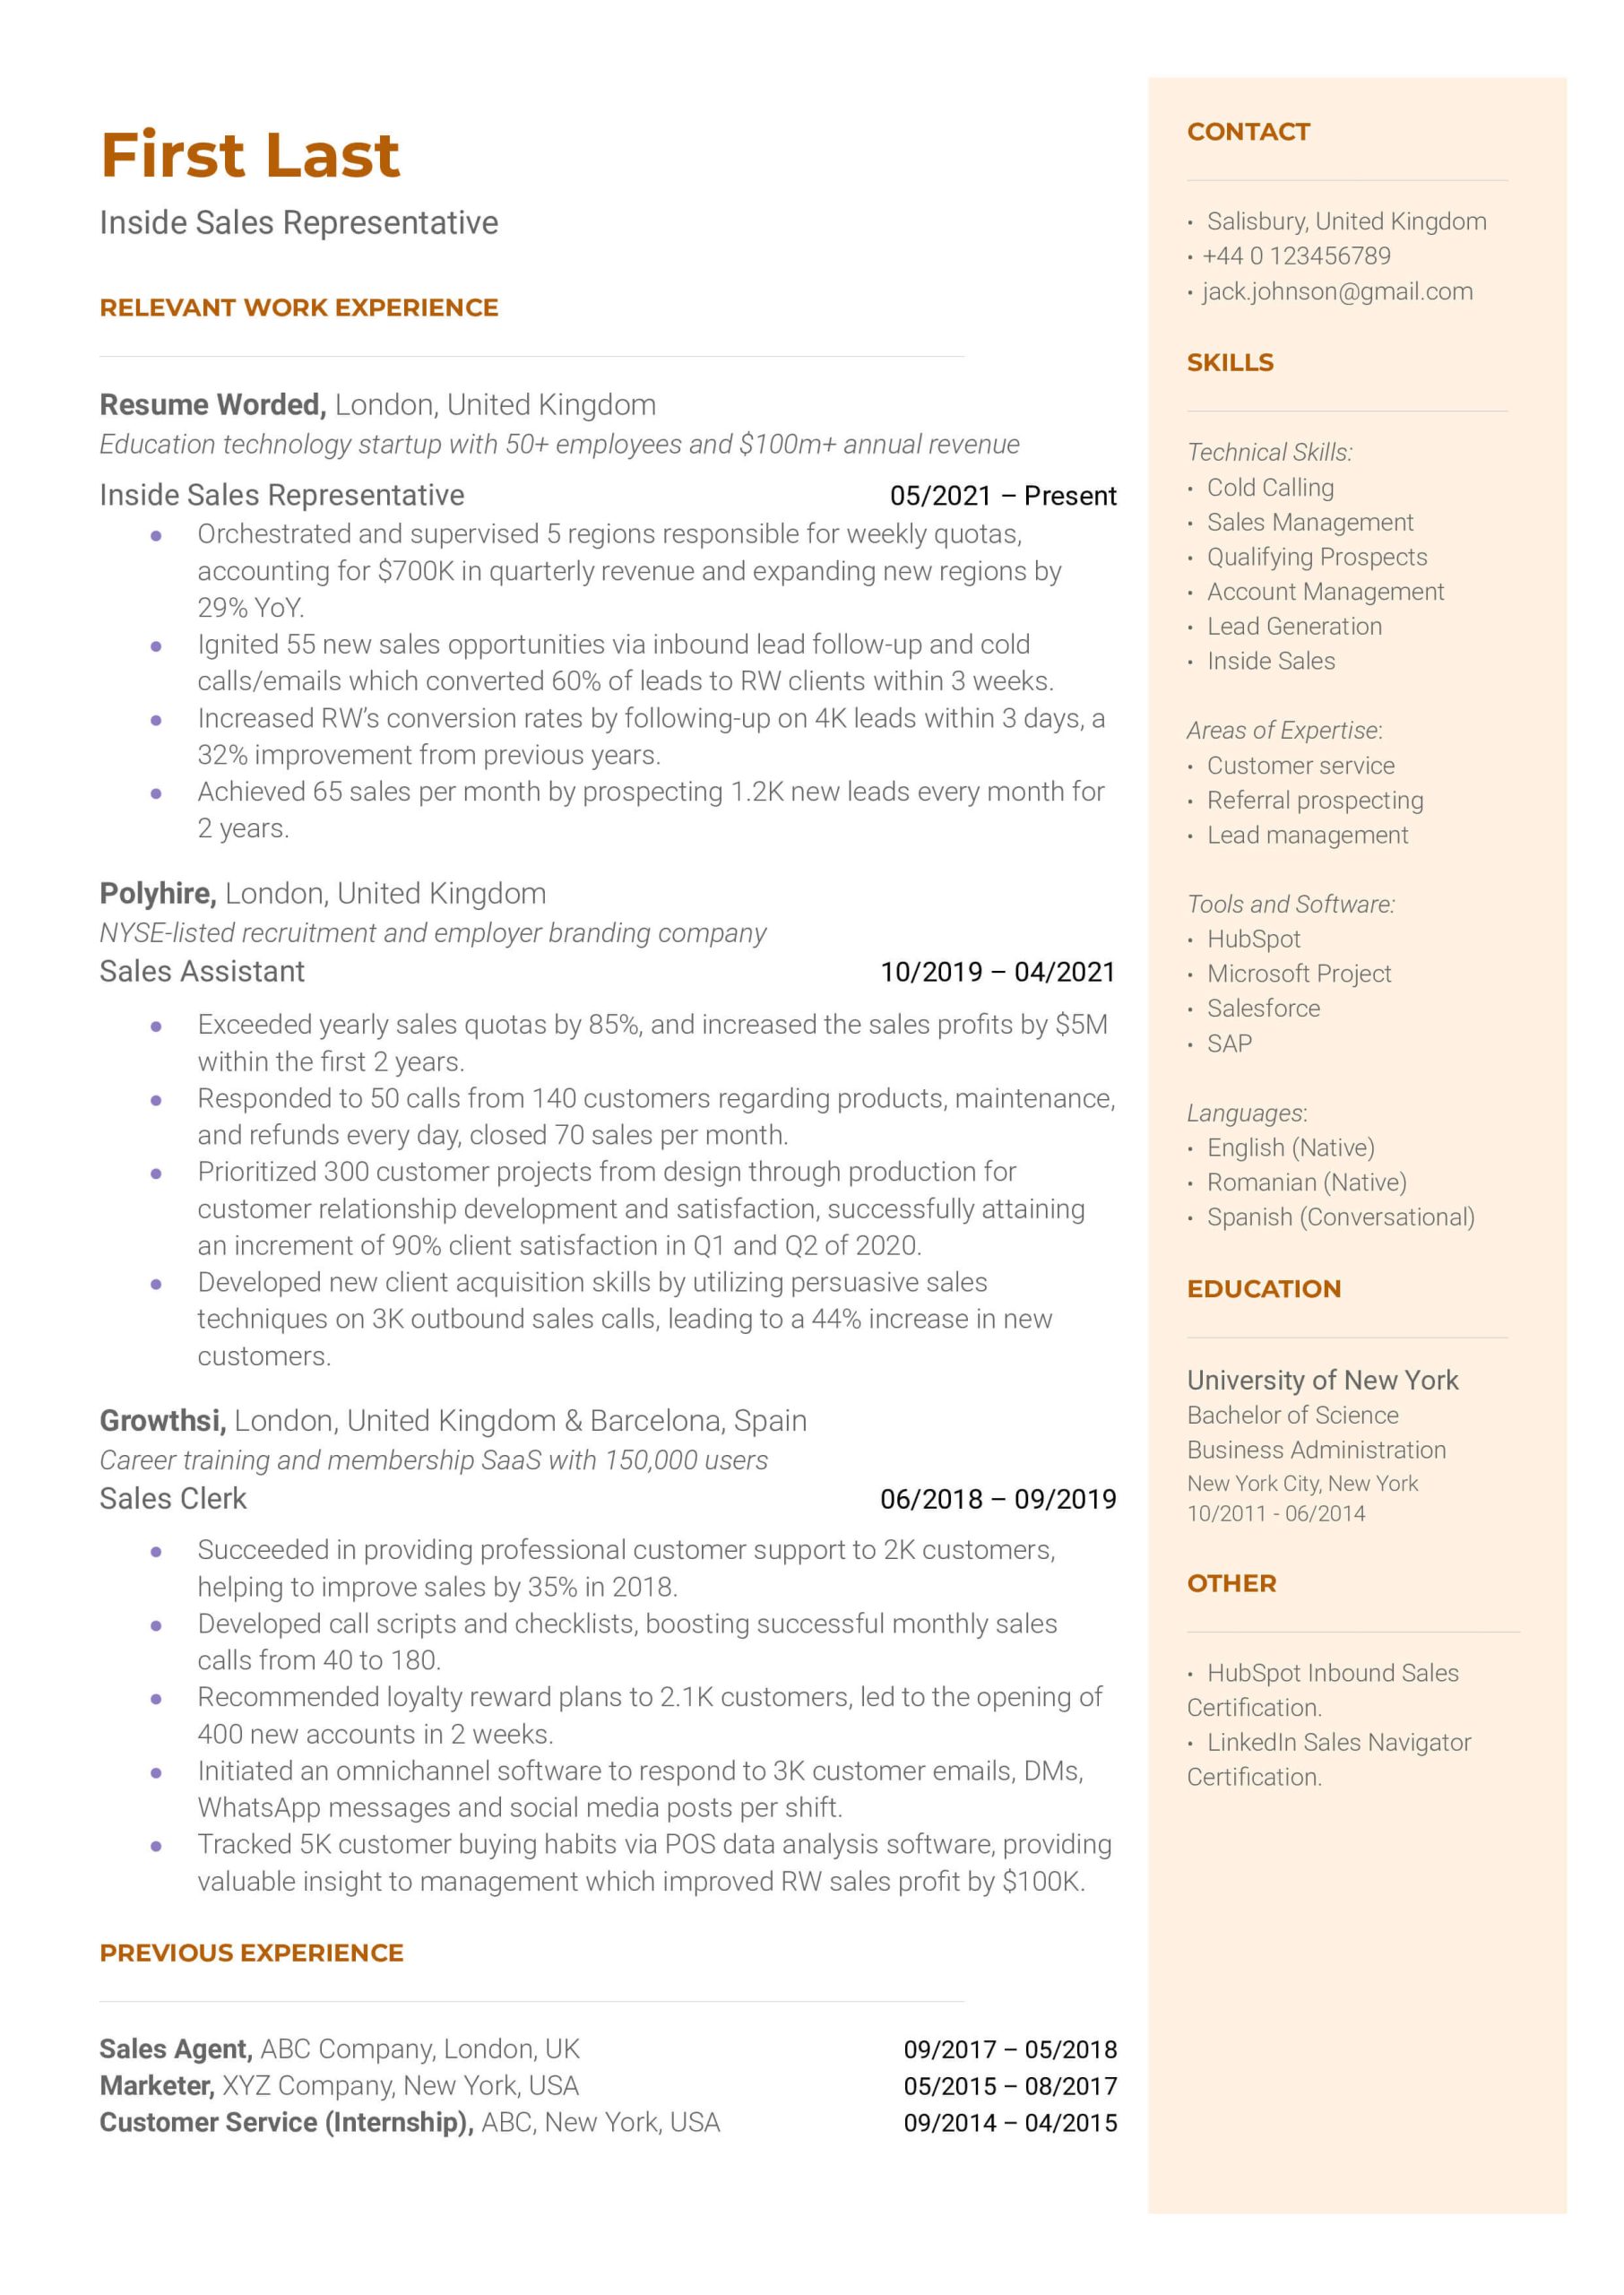 Inside Sales Direct Mail Sample Resume 10 Sales associate Resume Examples for 2022 Resume Worded